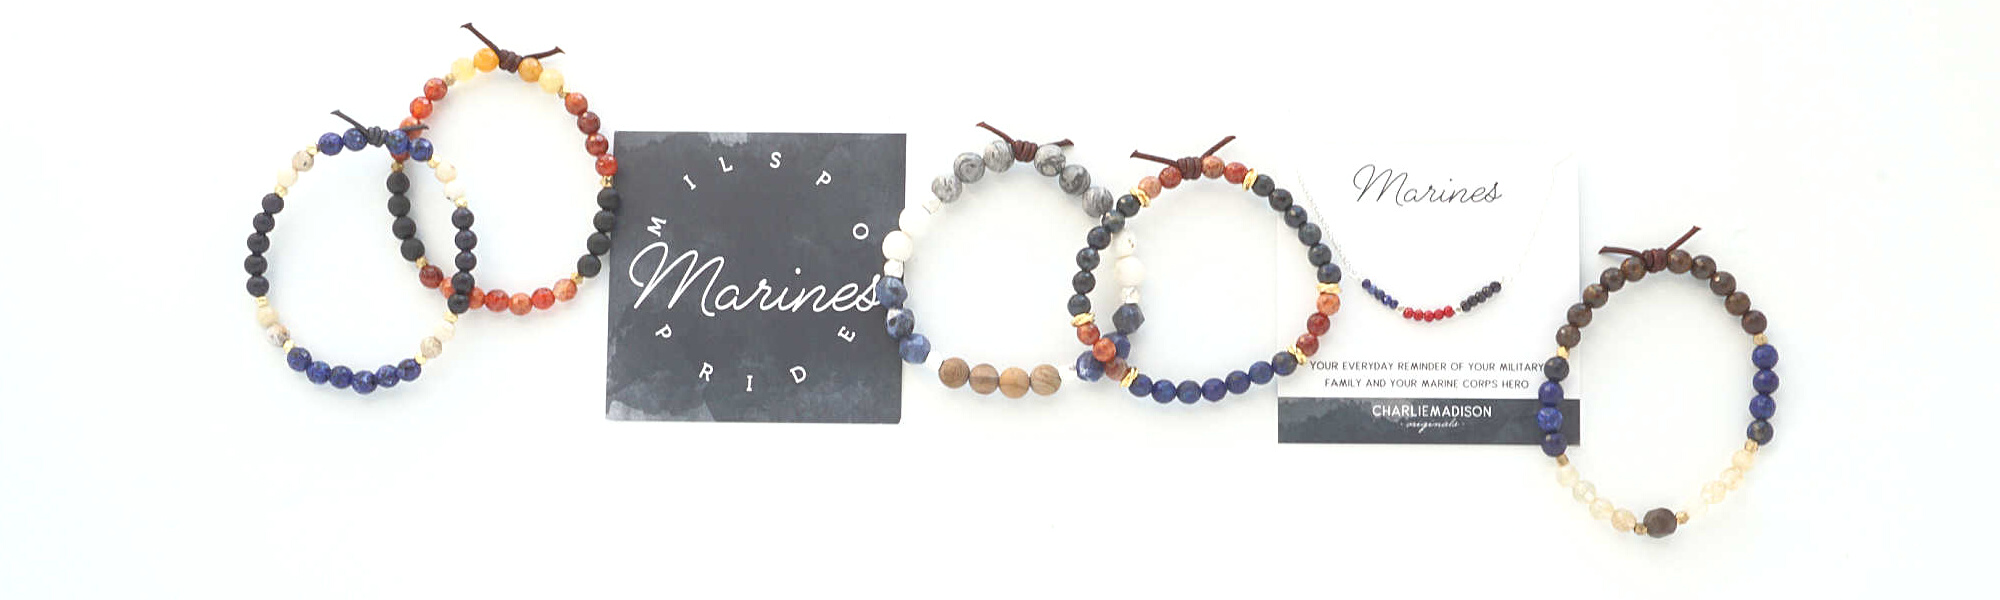 Jewelry for Marine Corps Families